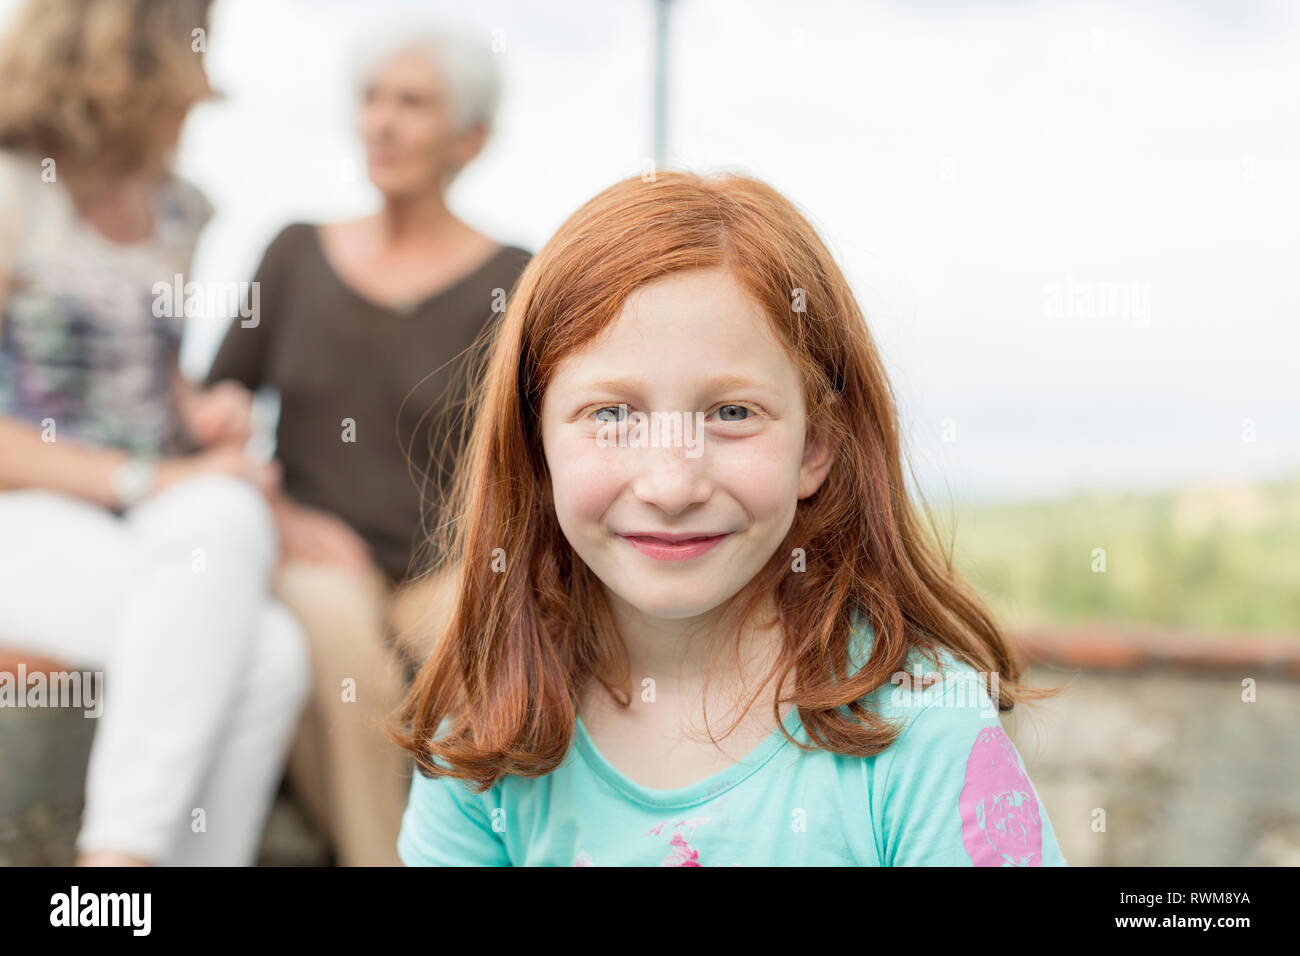 Red haired girl with mother and grandmother in background, portrait Stock Photo